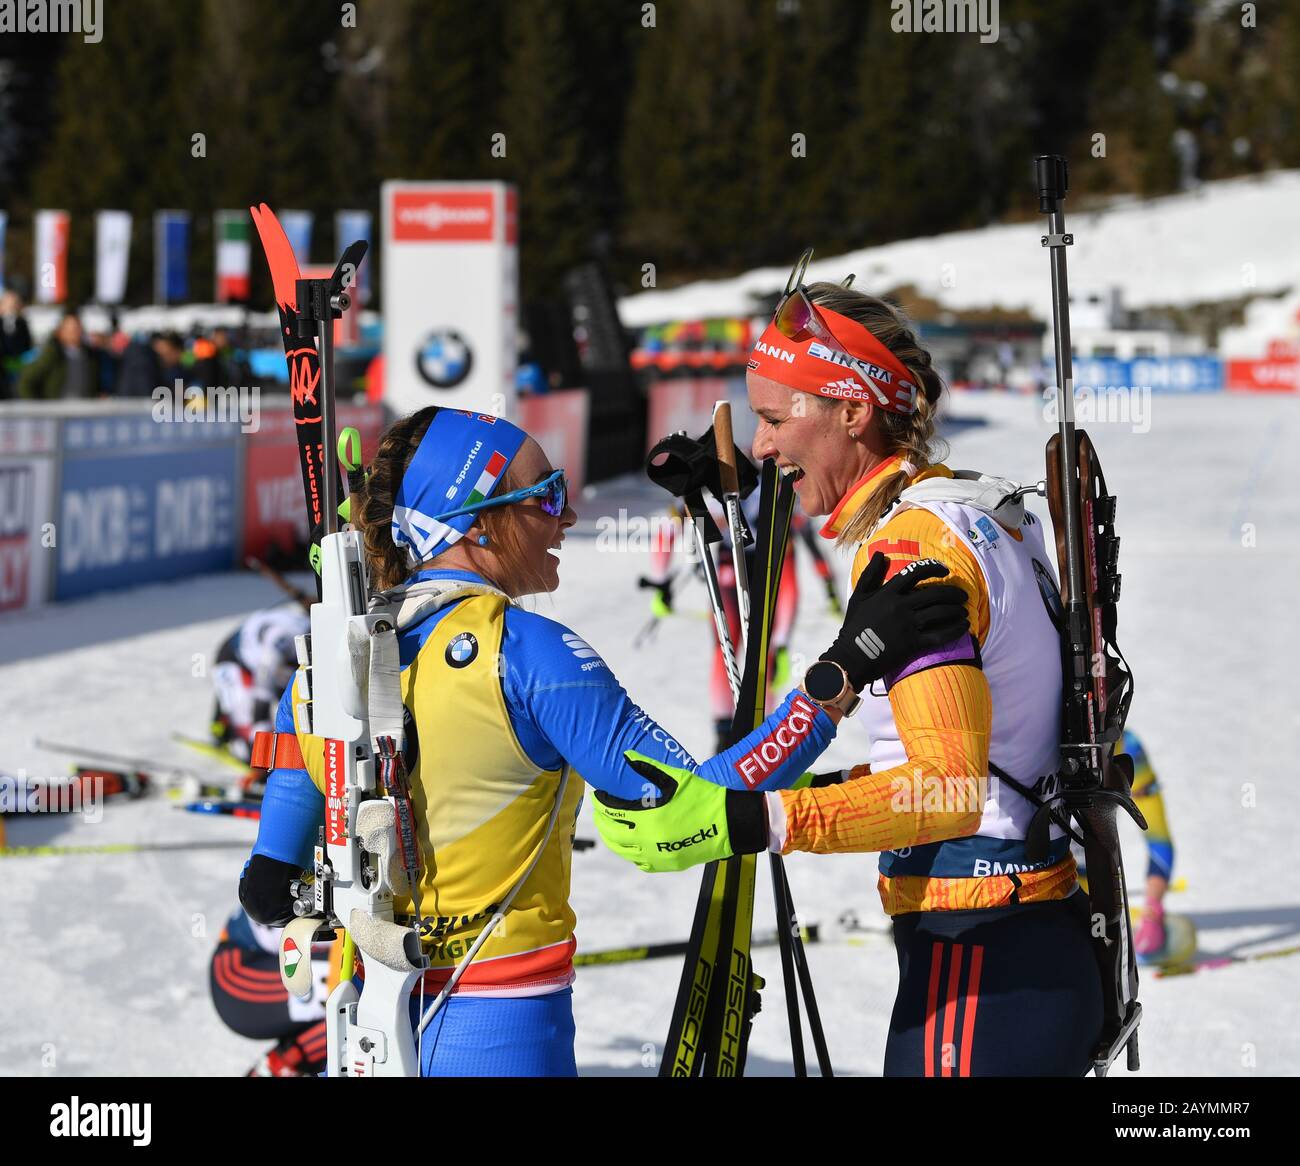 Antholz, Italy. 16th Feb, 2020. Biathlon: World Championship, pursuit 10 km,  women. The winner Dorothea Wierer (l) from Italy and the runner-up, Denise  Herrmann from Germany, congratulate each other at the finish.